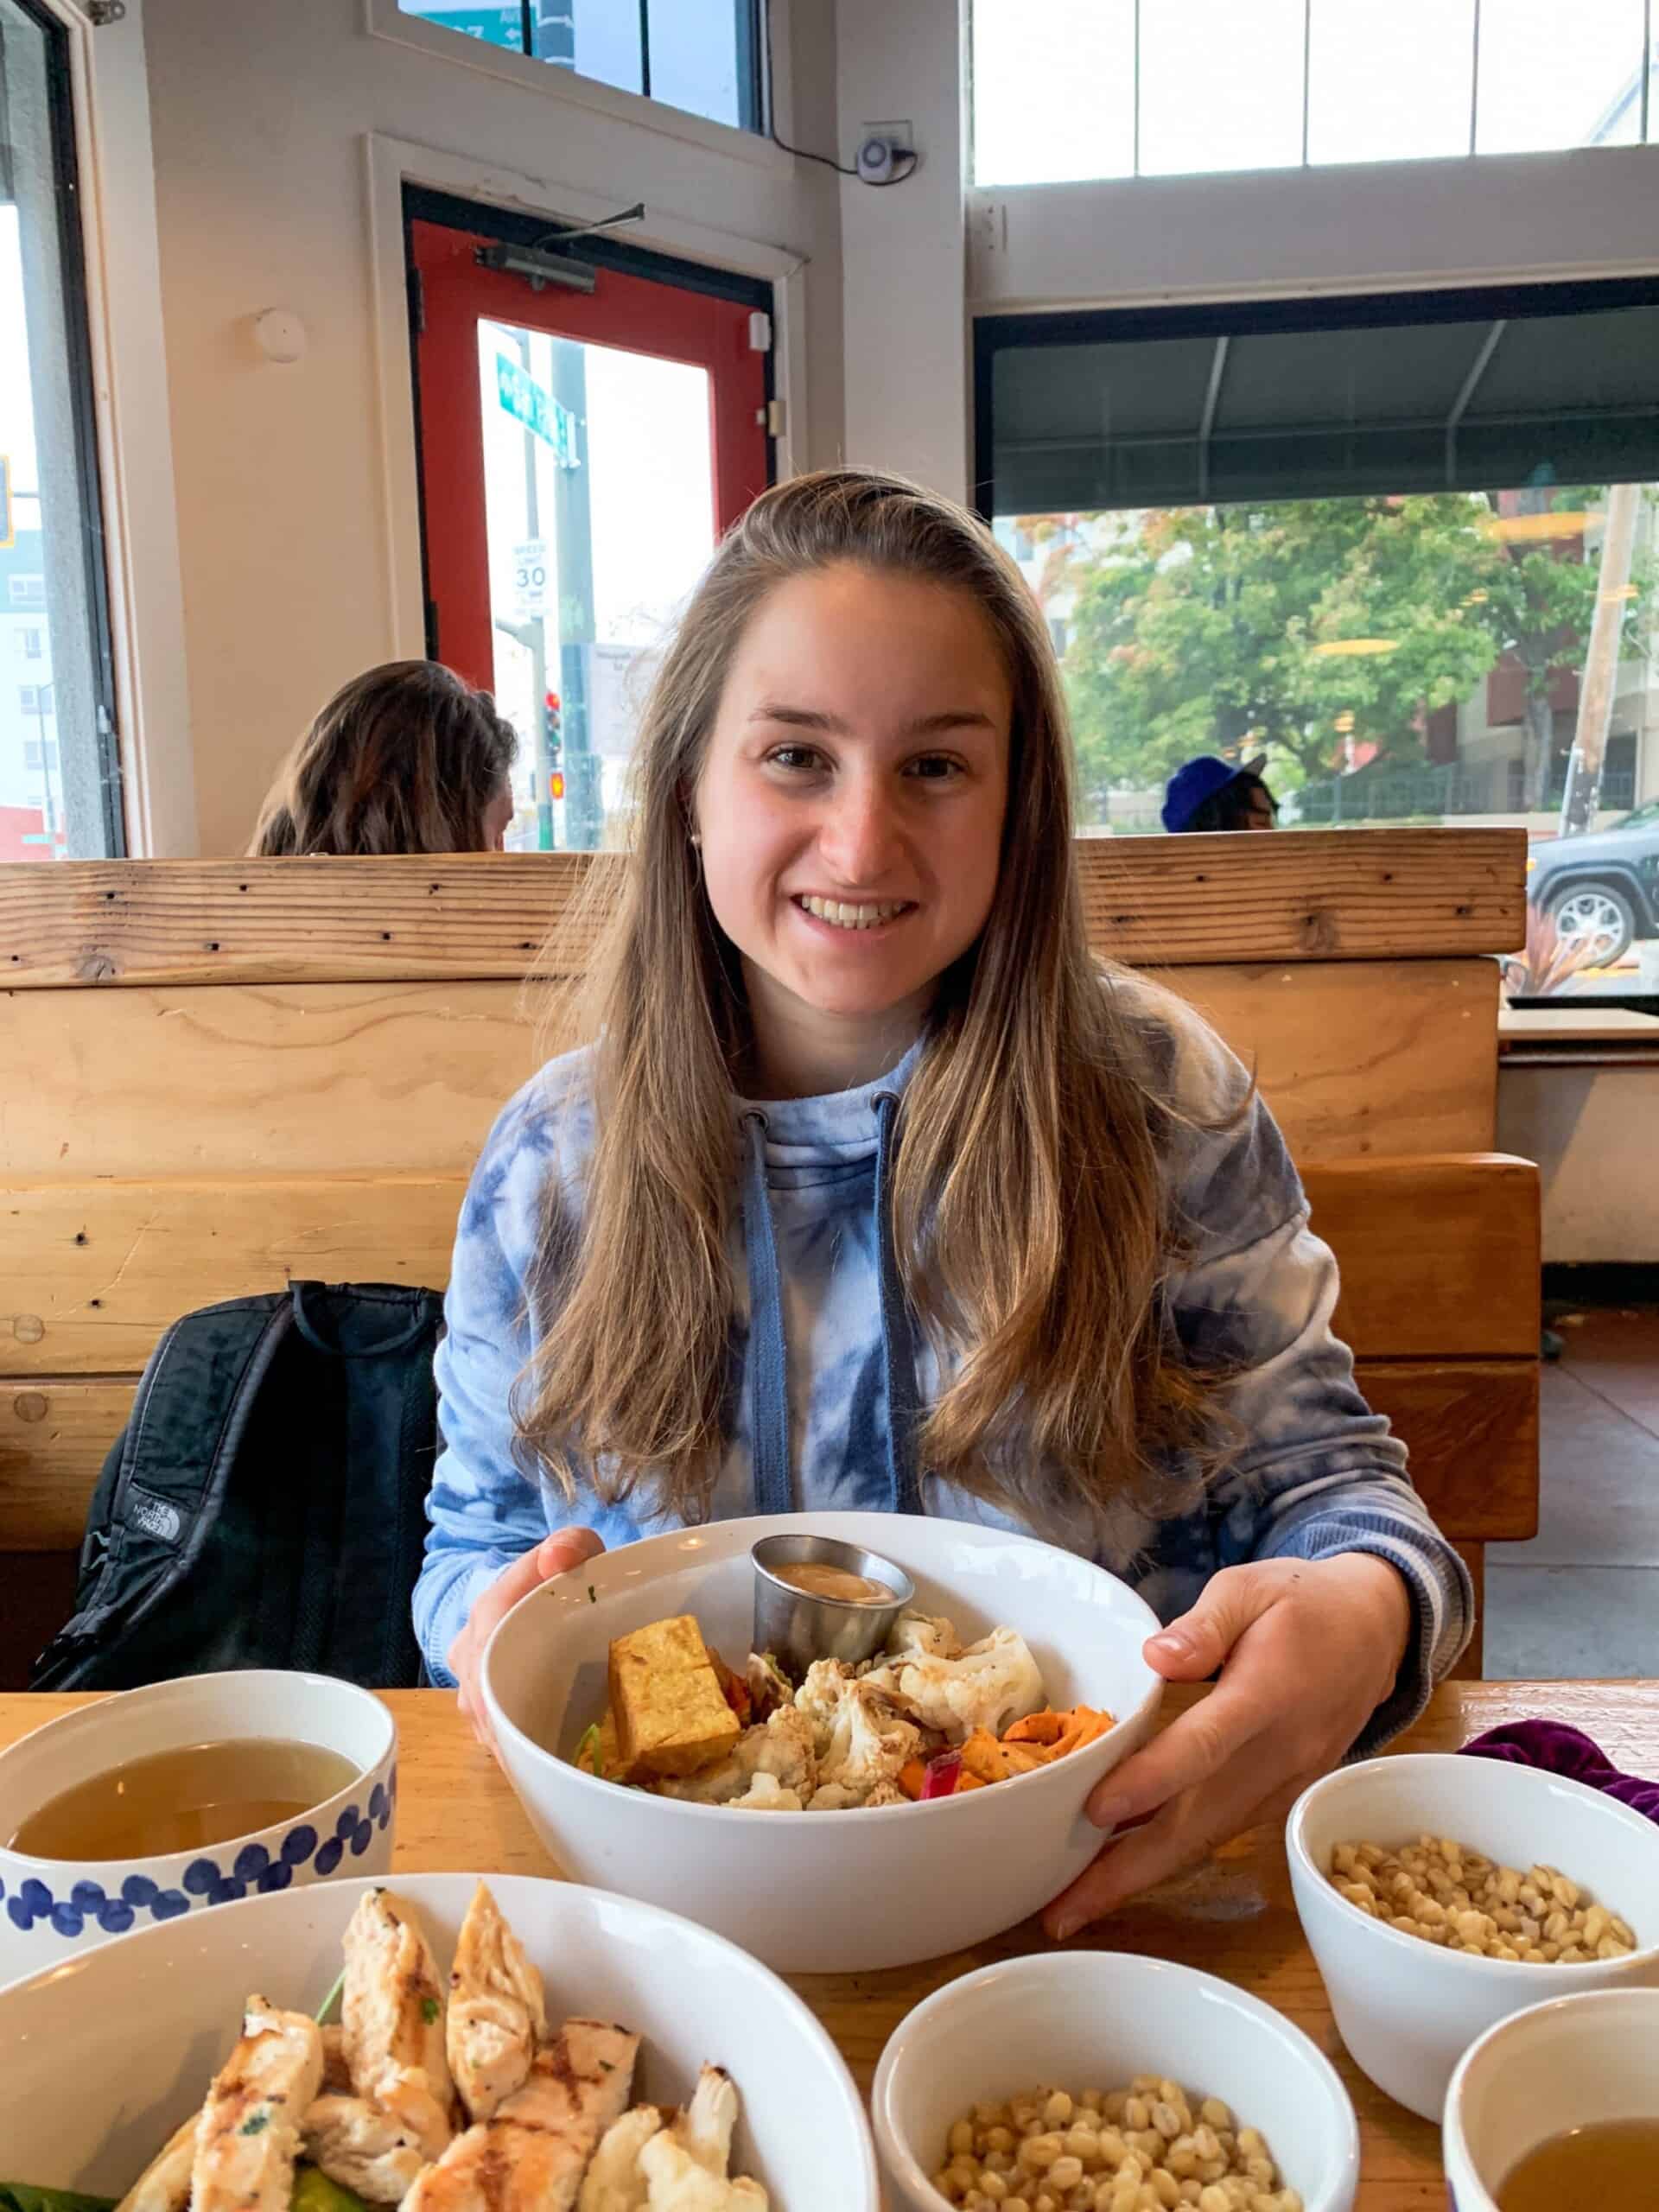 Young woman with long blond hair sits at a table with several bowls of food. She smiles for the camera. 